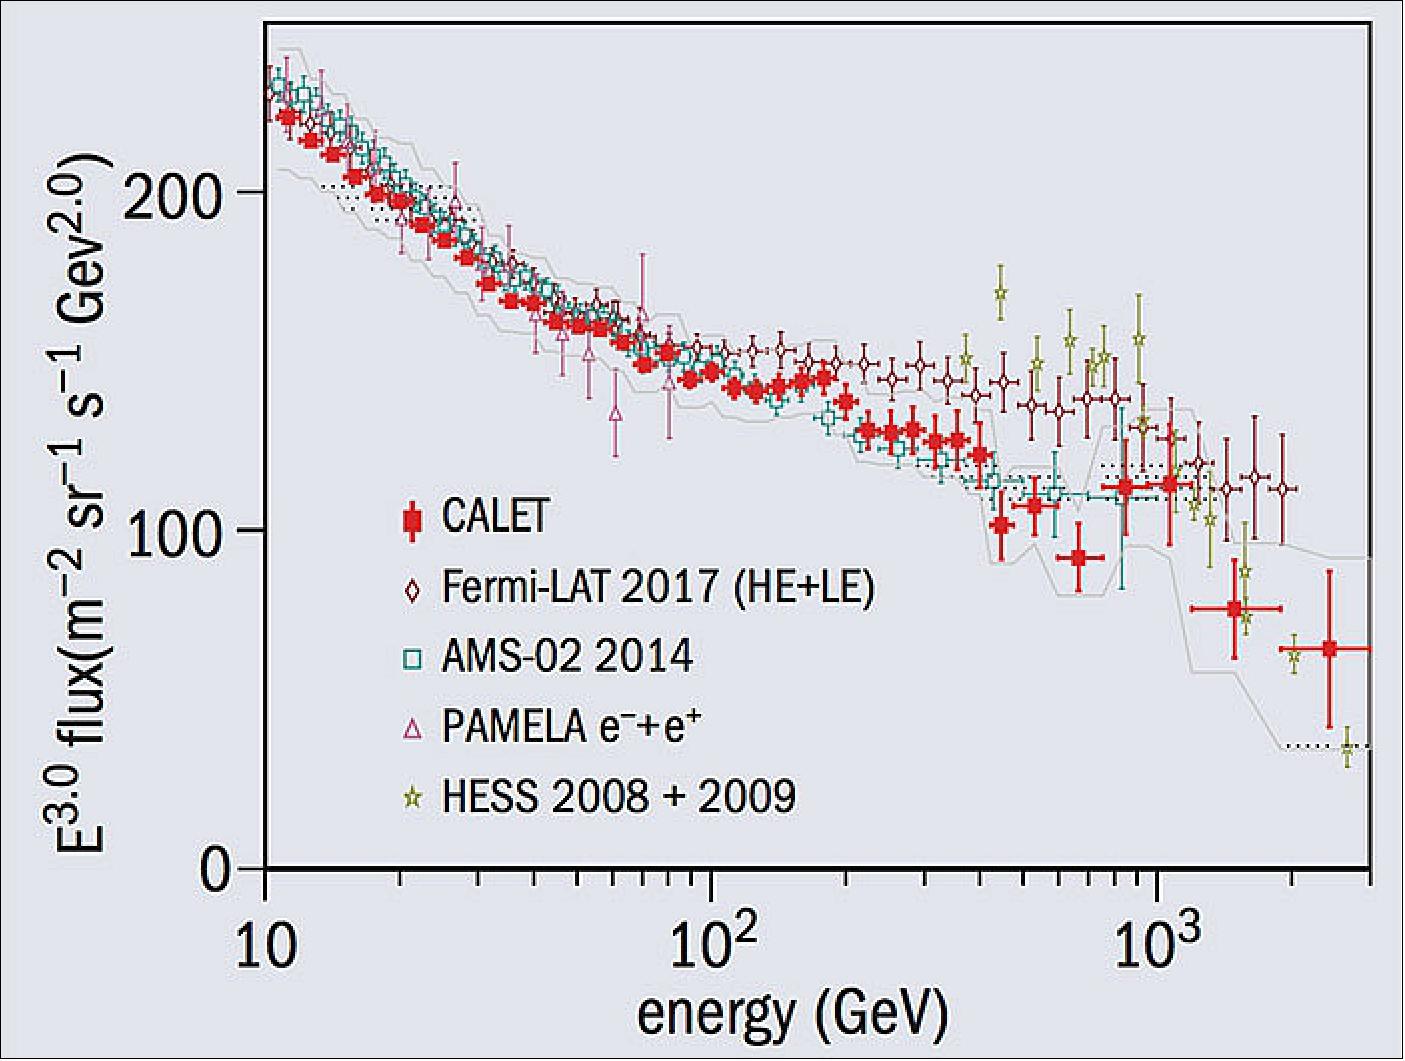 Figure 10: The cosmic-ray inclusive electron spectrum measured by CALET in the range 10 GeV to 3 TeV, where systematic errors (not including the uncertainty on the energy scale) are shown by the grey band. The present flux is reasonably consistent with the electron and positron spectrum seen by AMS-02 (image credit: CERN Courier)